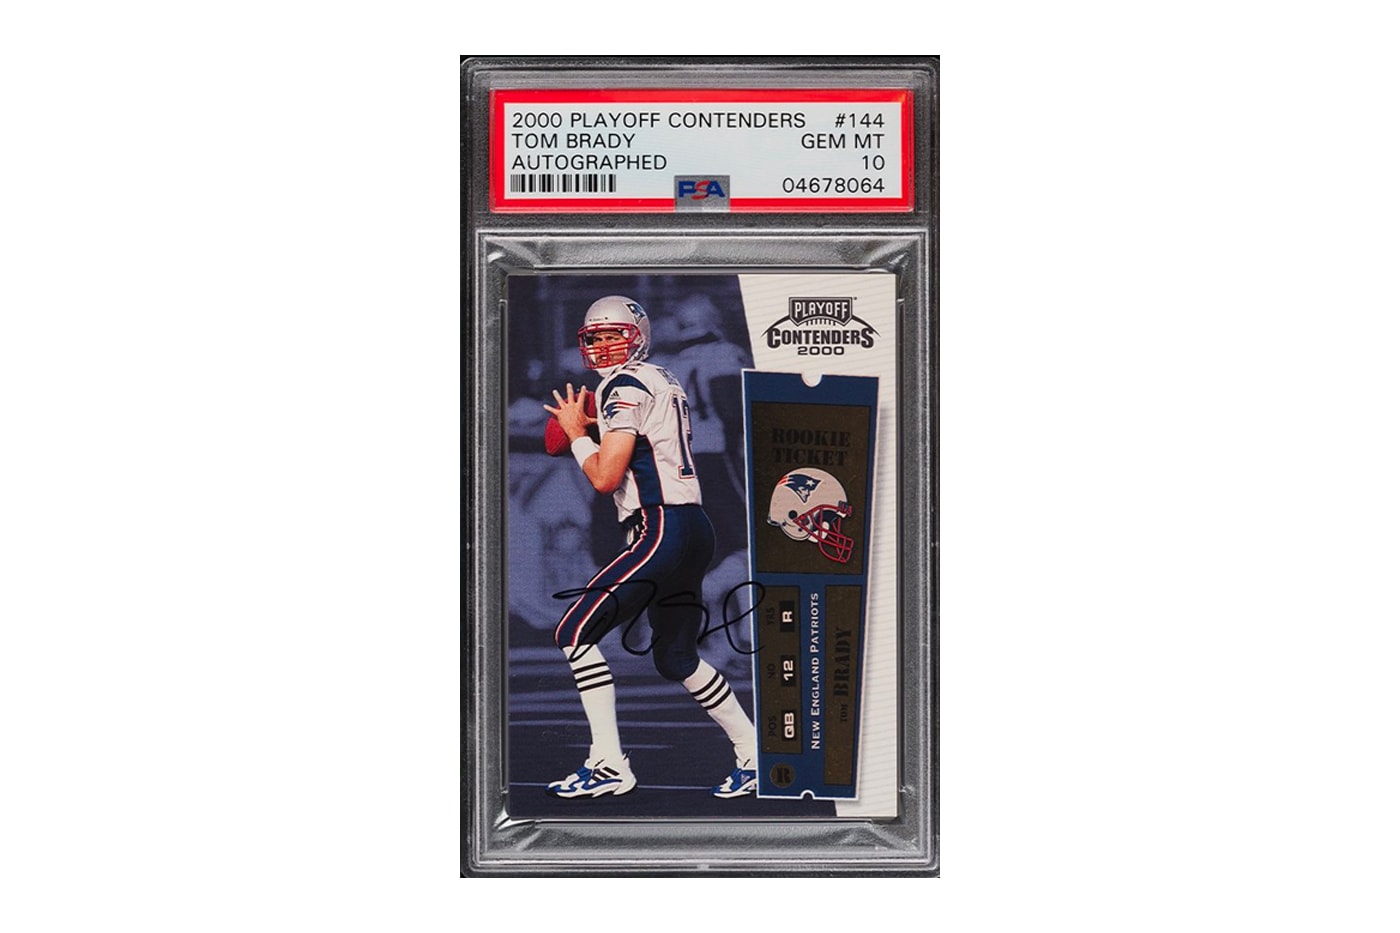 Tom Brady Autographed Patriots Rookie Card Auction $556K USD NFL American Football Tampa Bay buccaneers PWCC Auctions Trading Cards Sports New England Patriots 